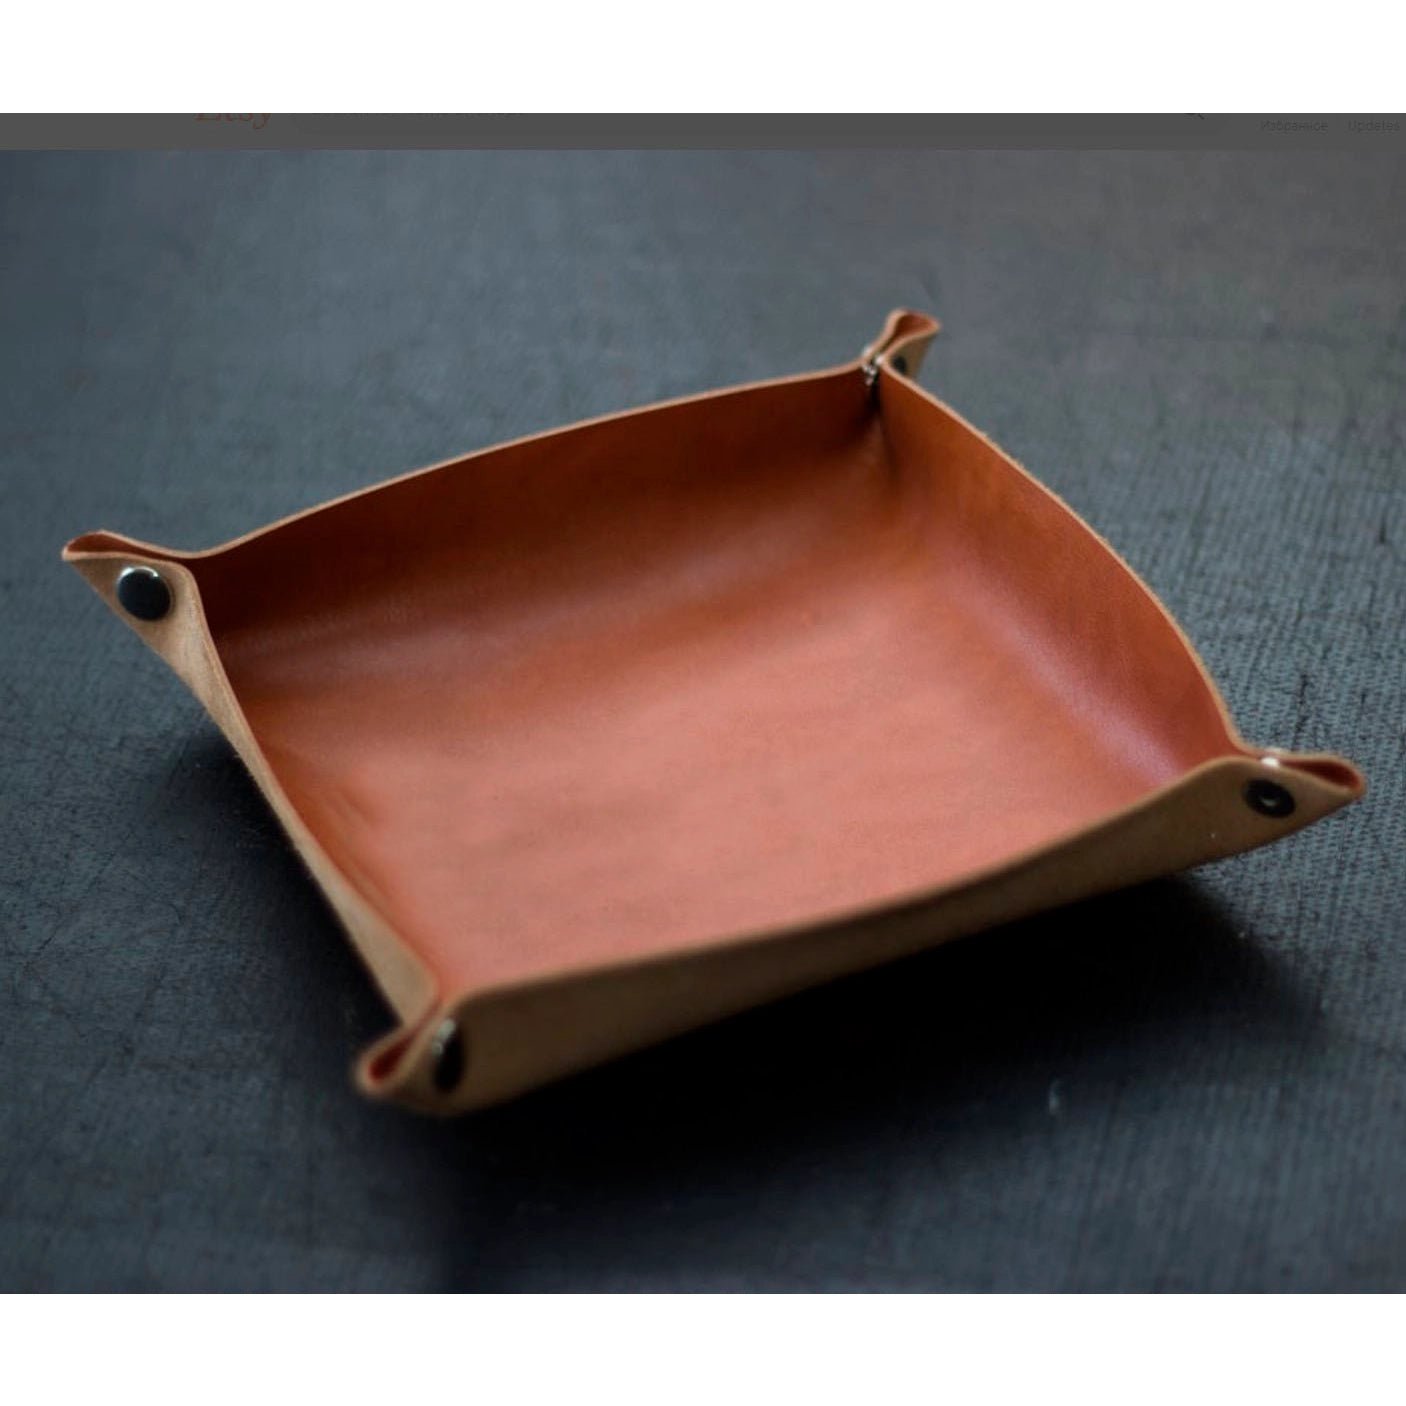 leather valet tray, catchall tray, storage tray - Maple City Timepieces